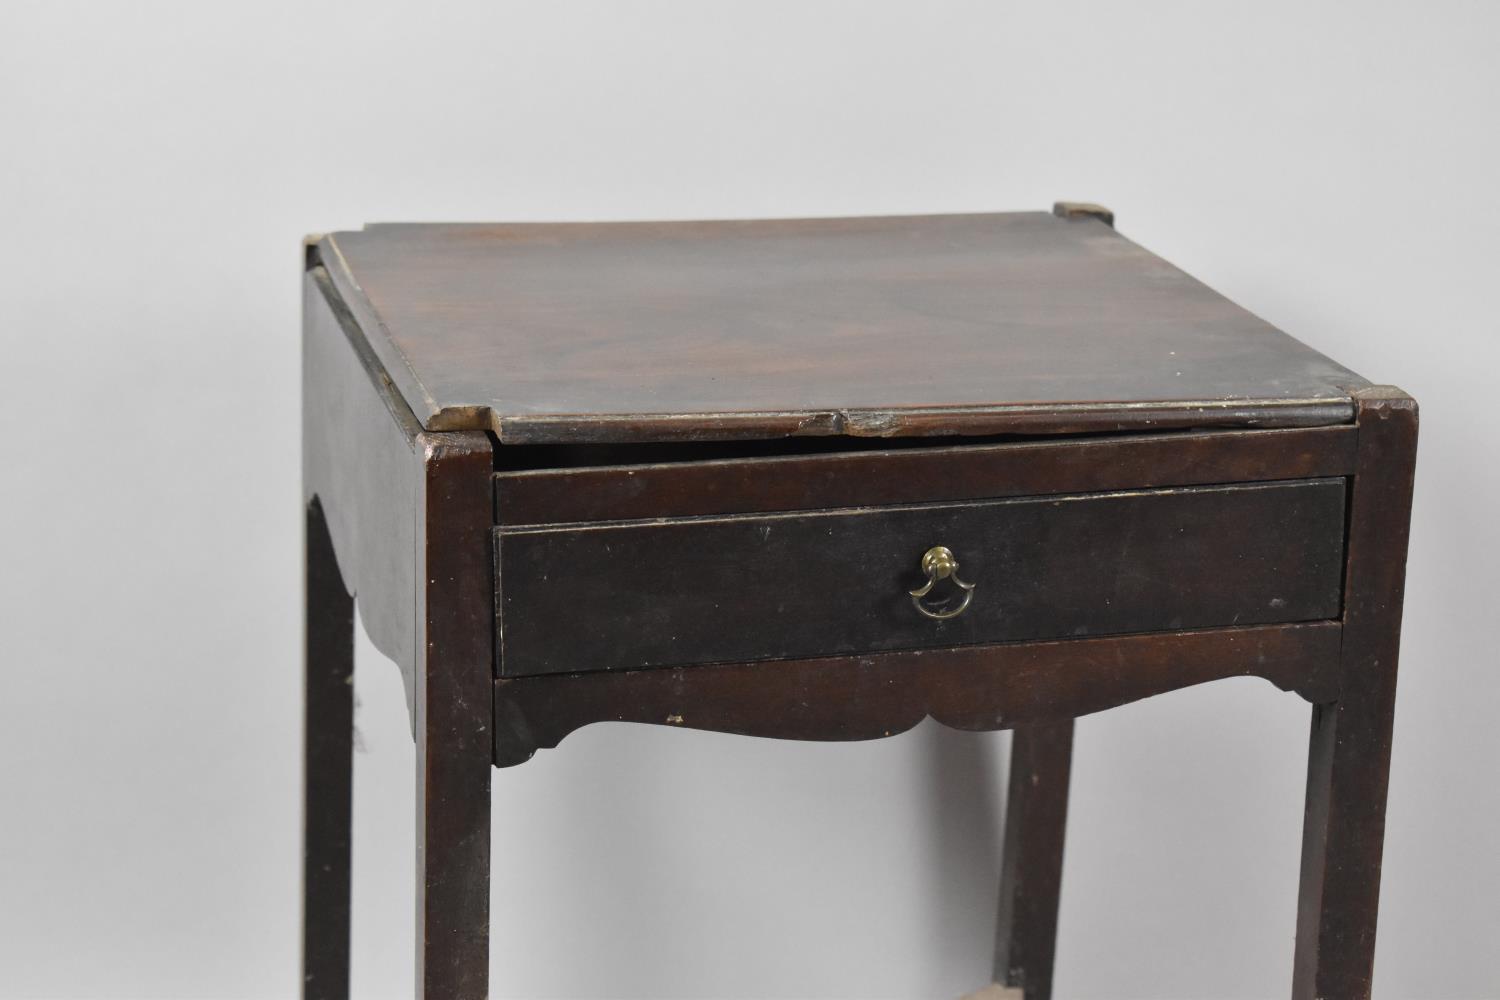 A Late 19th/Early 20th Century Mahogany Washstand Table with Single Drawer, 37cm Wide - Image 2 of 2